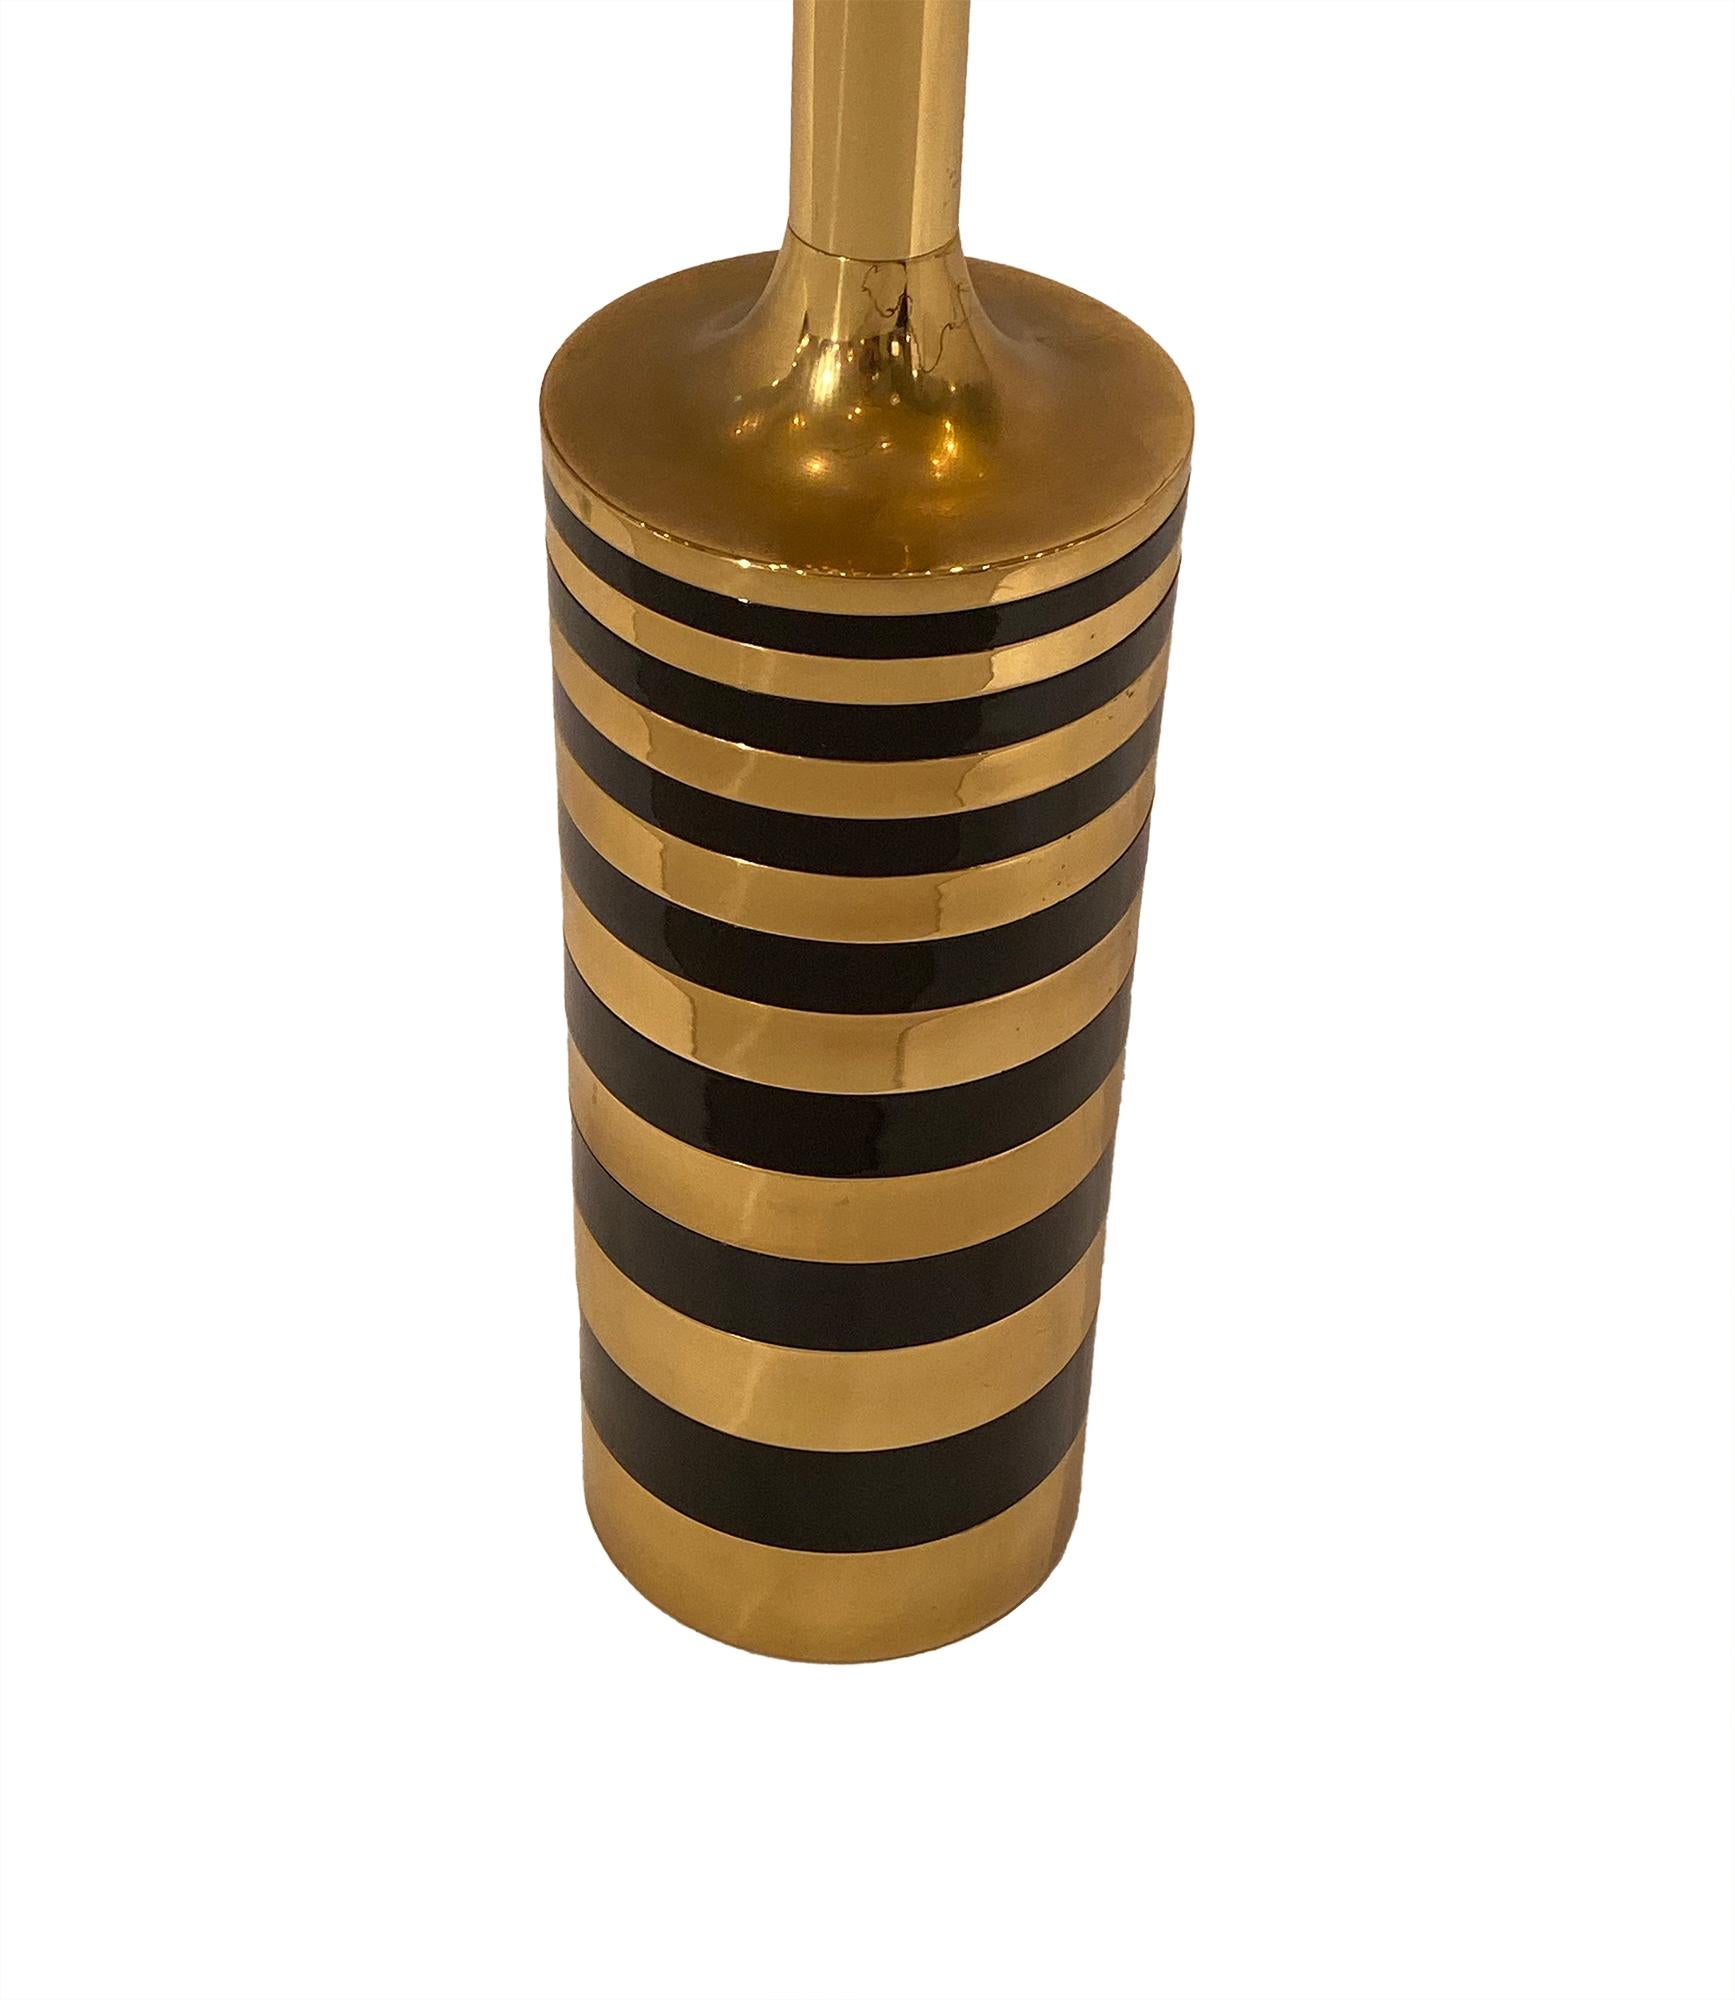 Brass vintage French table lamp in the modernist style. We love the gilt brass in contrast with the black lacquered steel and the impressive size. This piece has been newly wired to fit US standards.